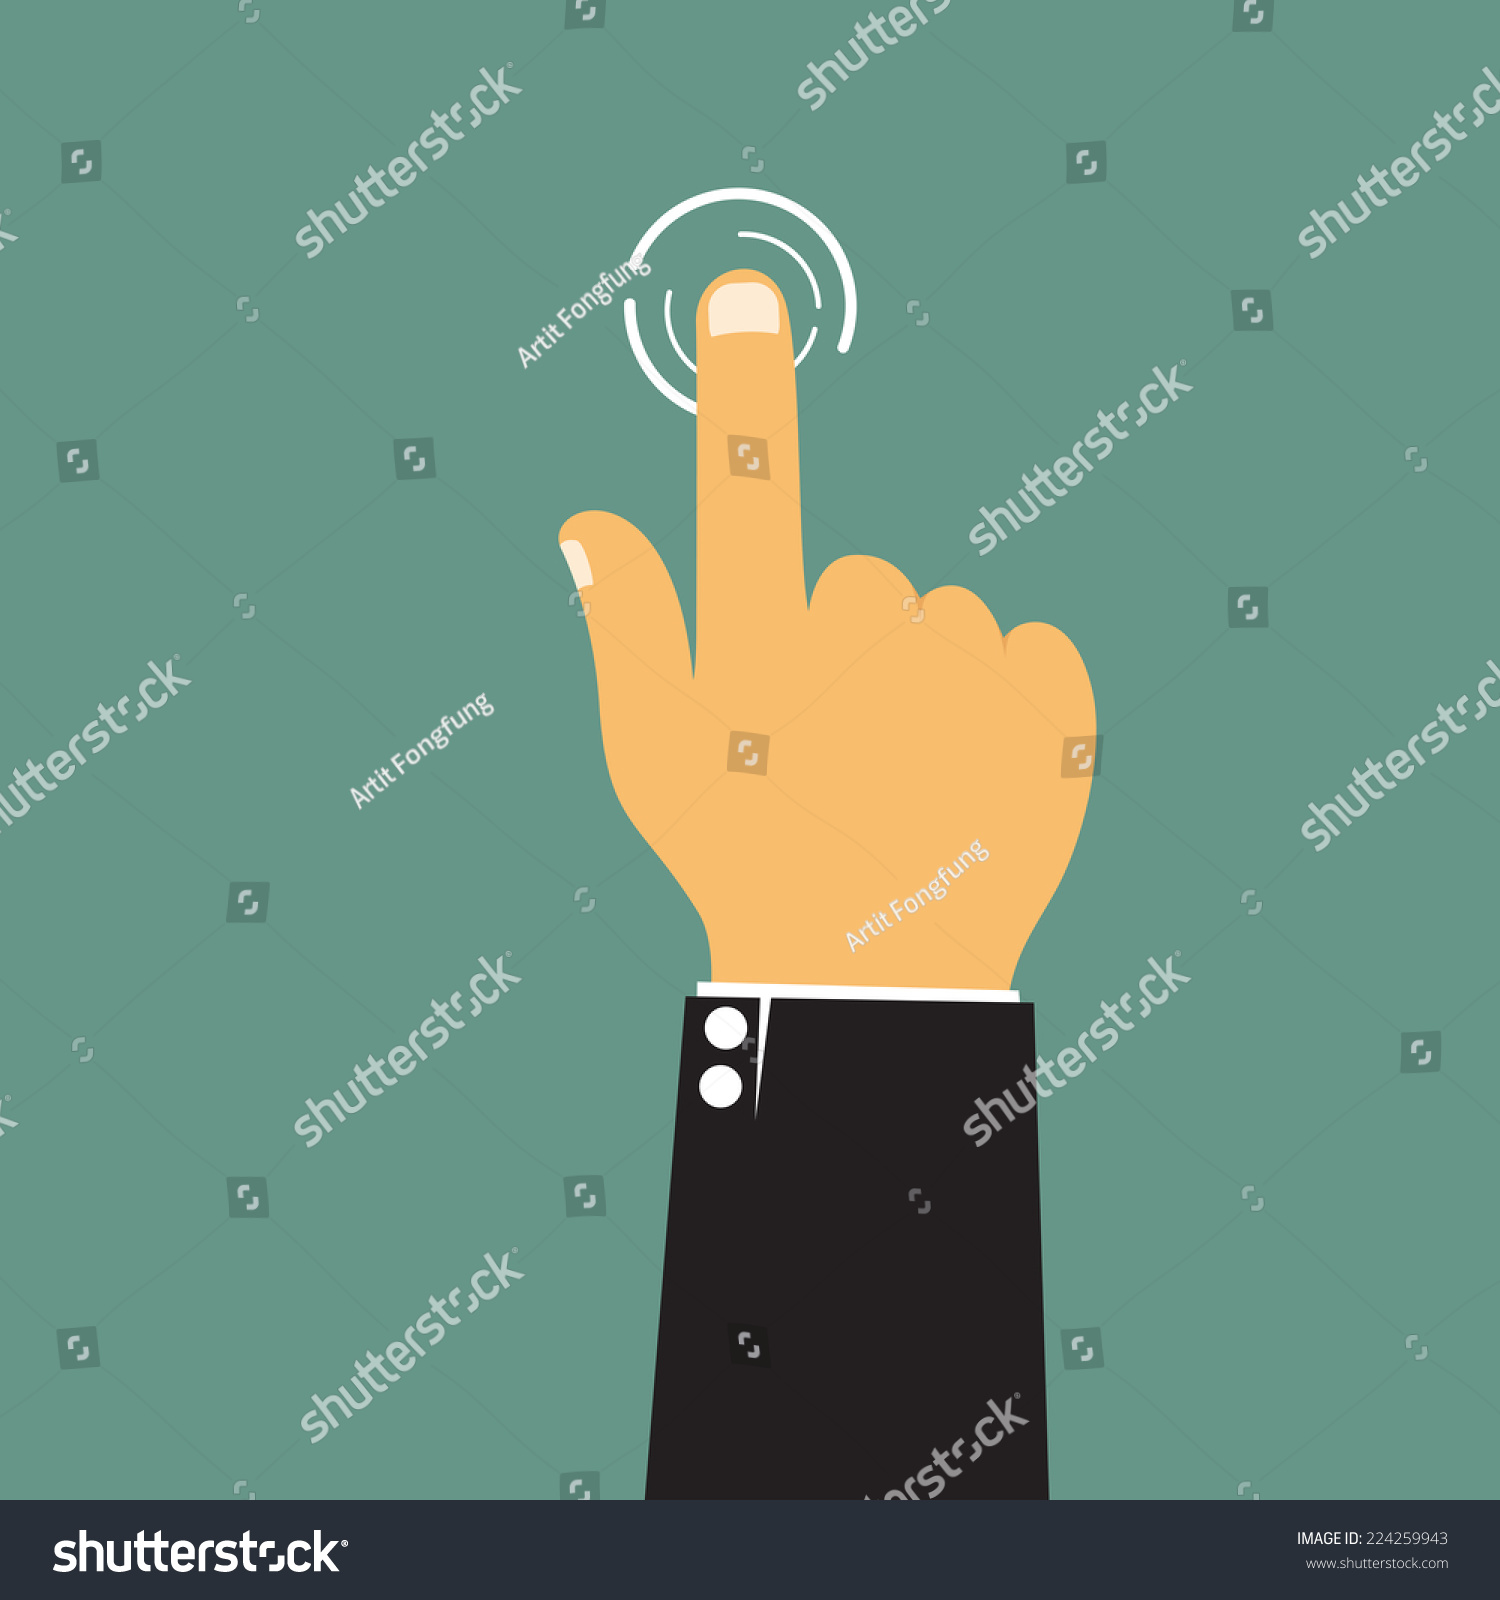 cartoon business hand pressing a button with index finger extended, vector illustration. #224259943